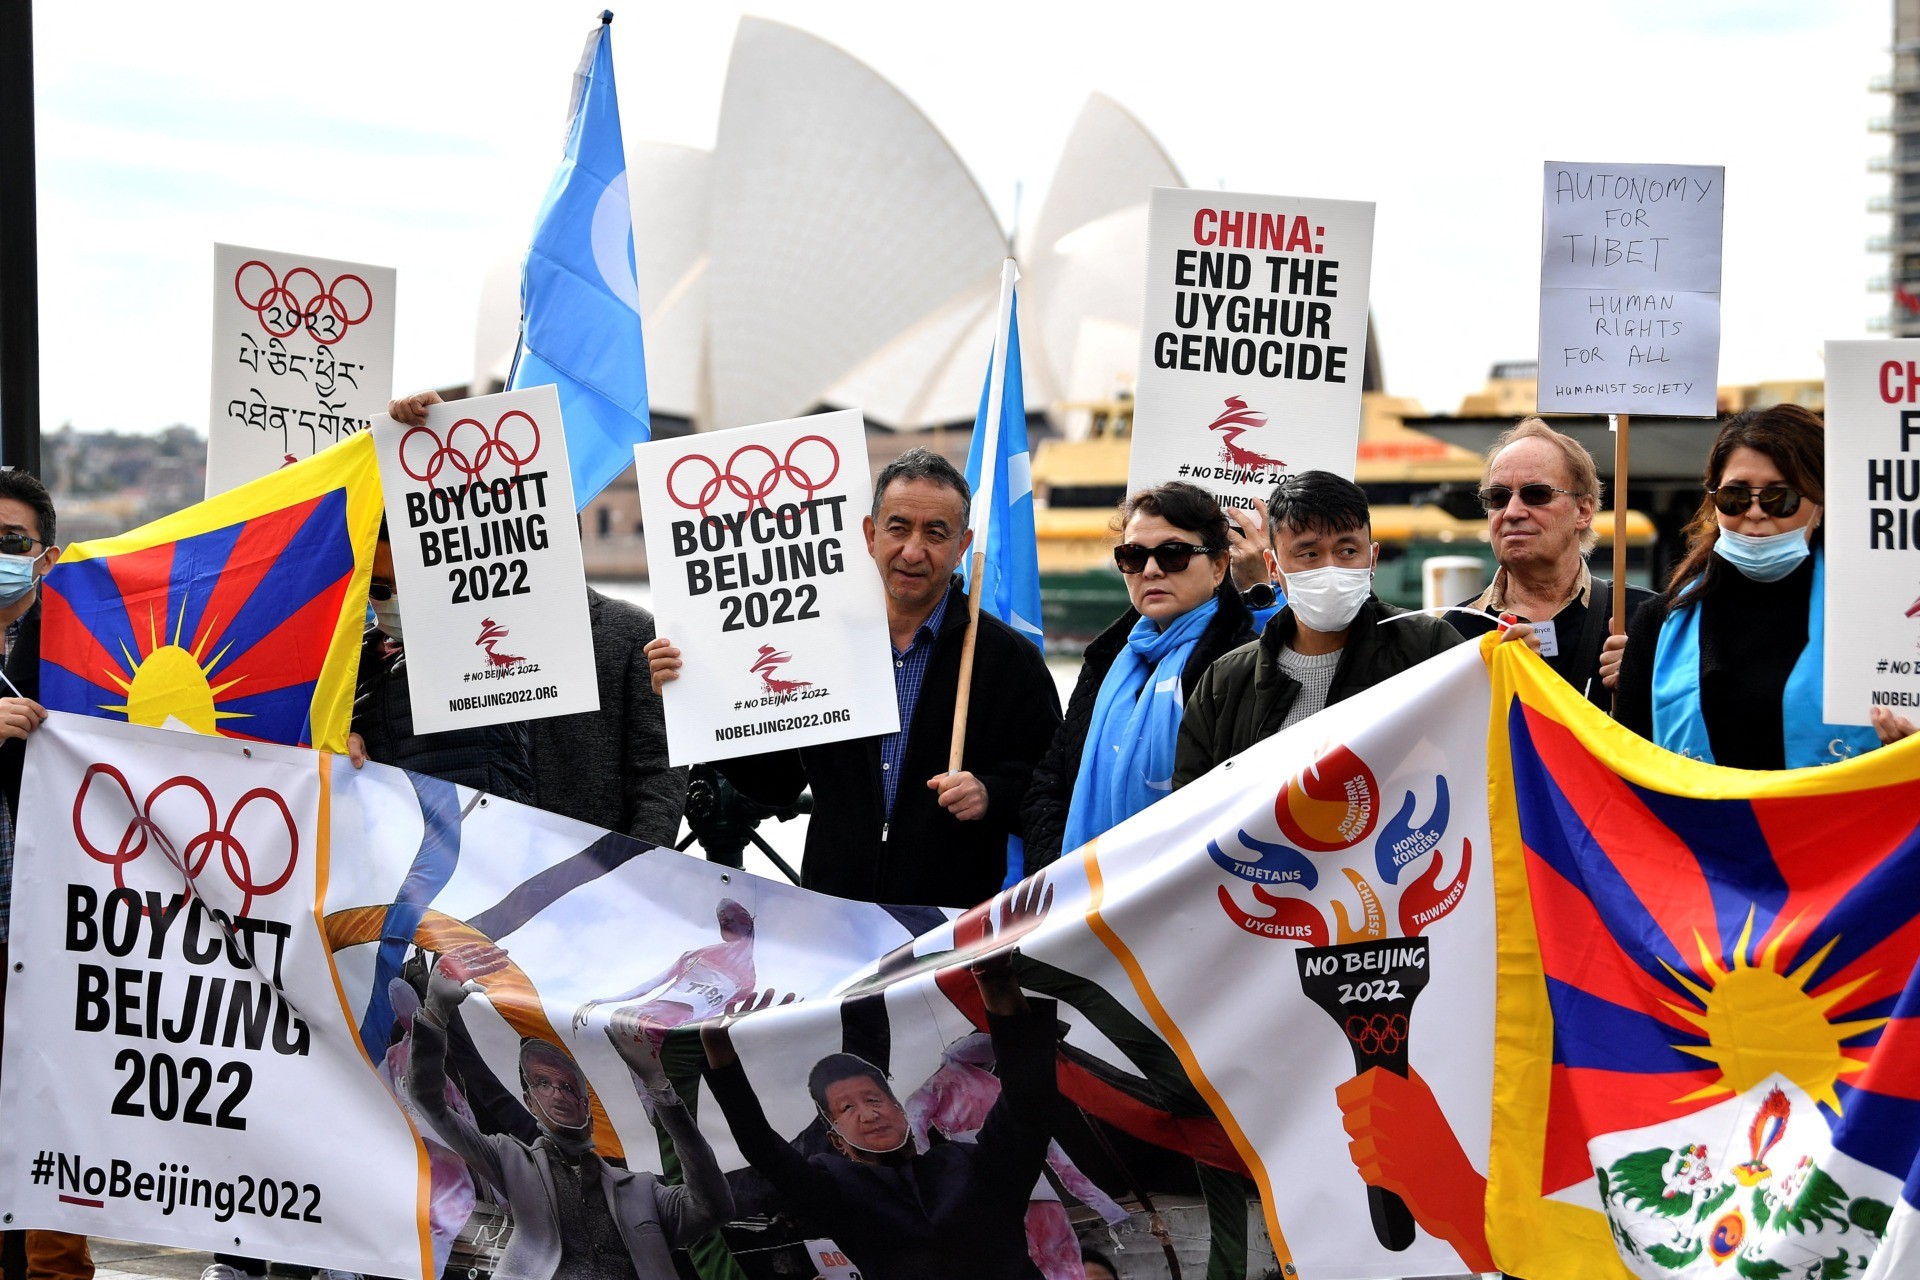 Protesters hold up placards and banners as they attend a demonstration in Sydney on June 23, 2021 to call on the Australian government to boycott the 2022 Beijing Winter Olympics over China's human rights record. (Photo by Saeed KHAN / AFP) (Photo by SAEED KHAN/AFP via Getty Images)